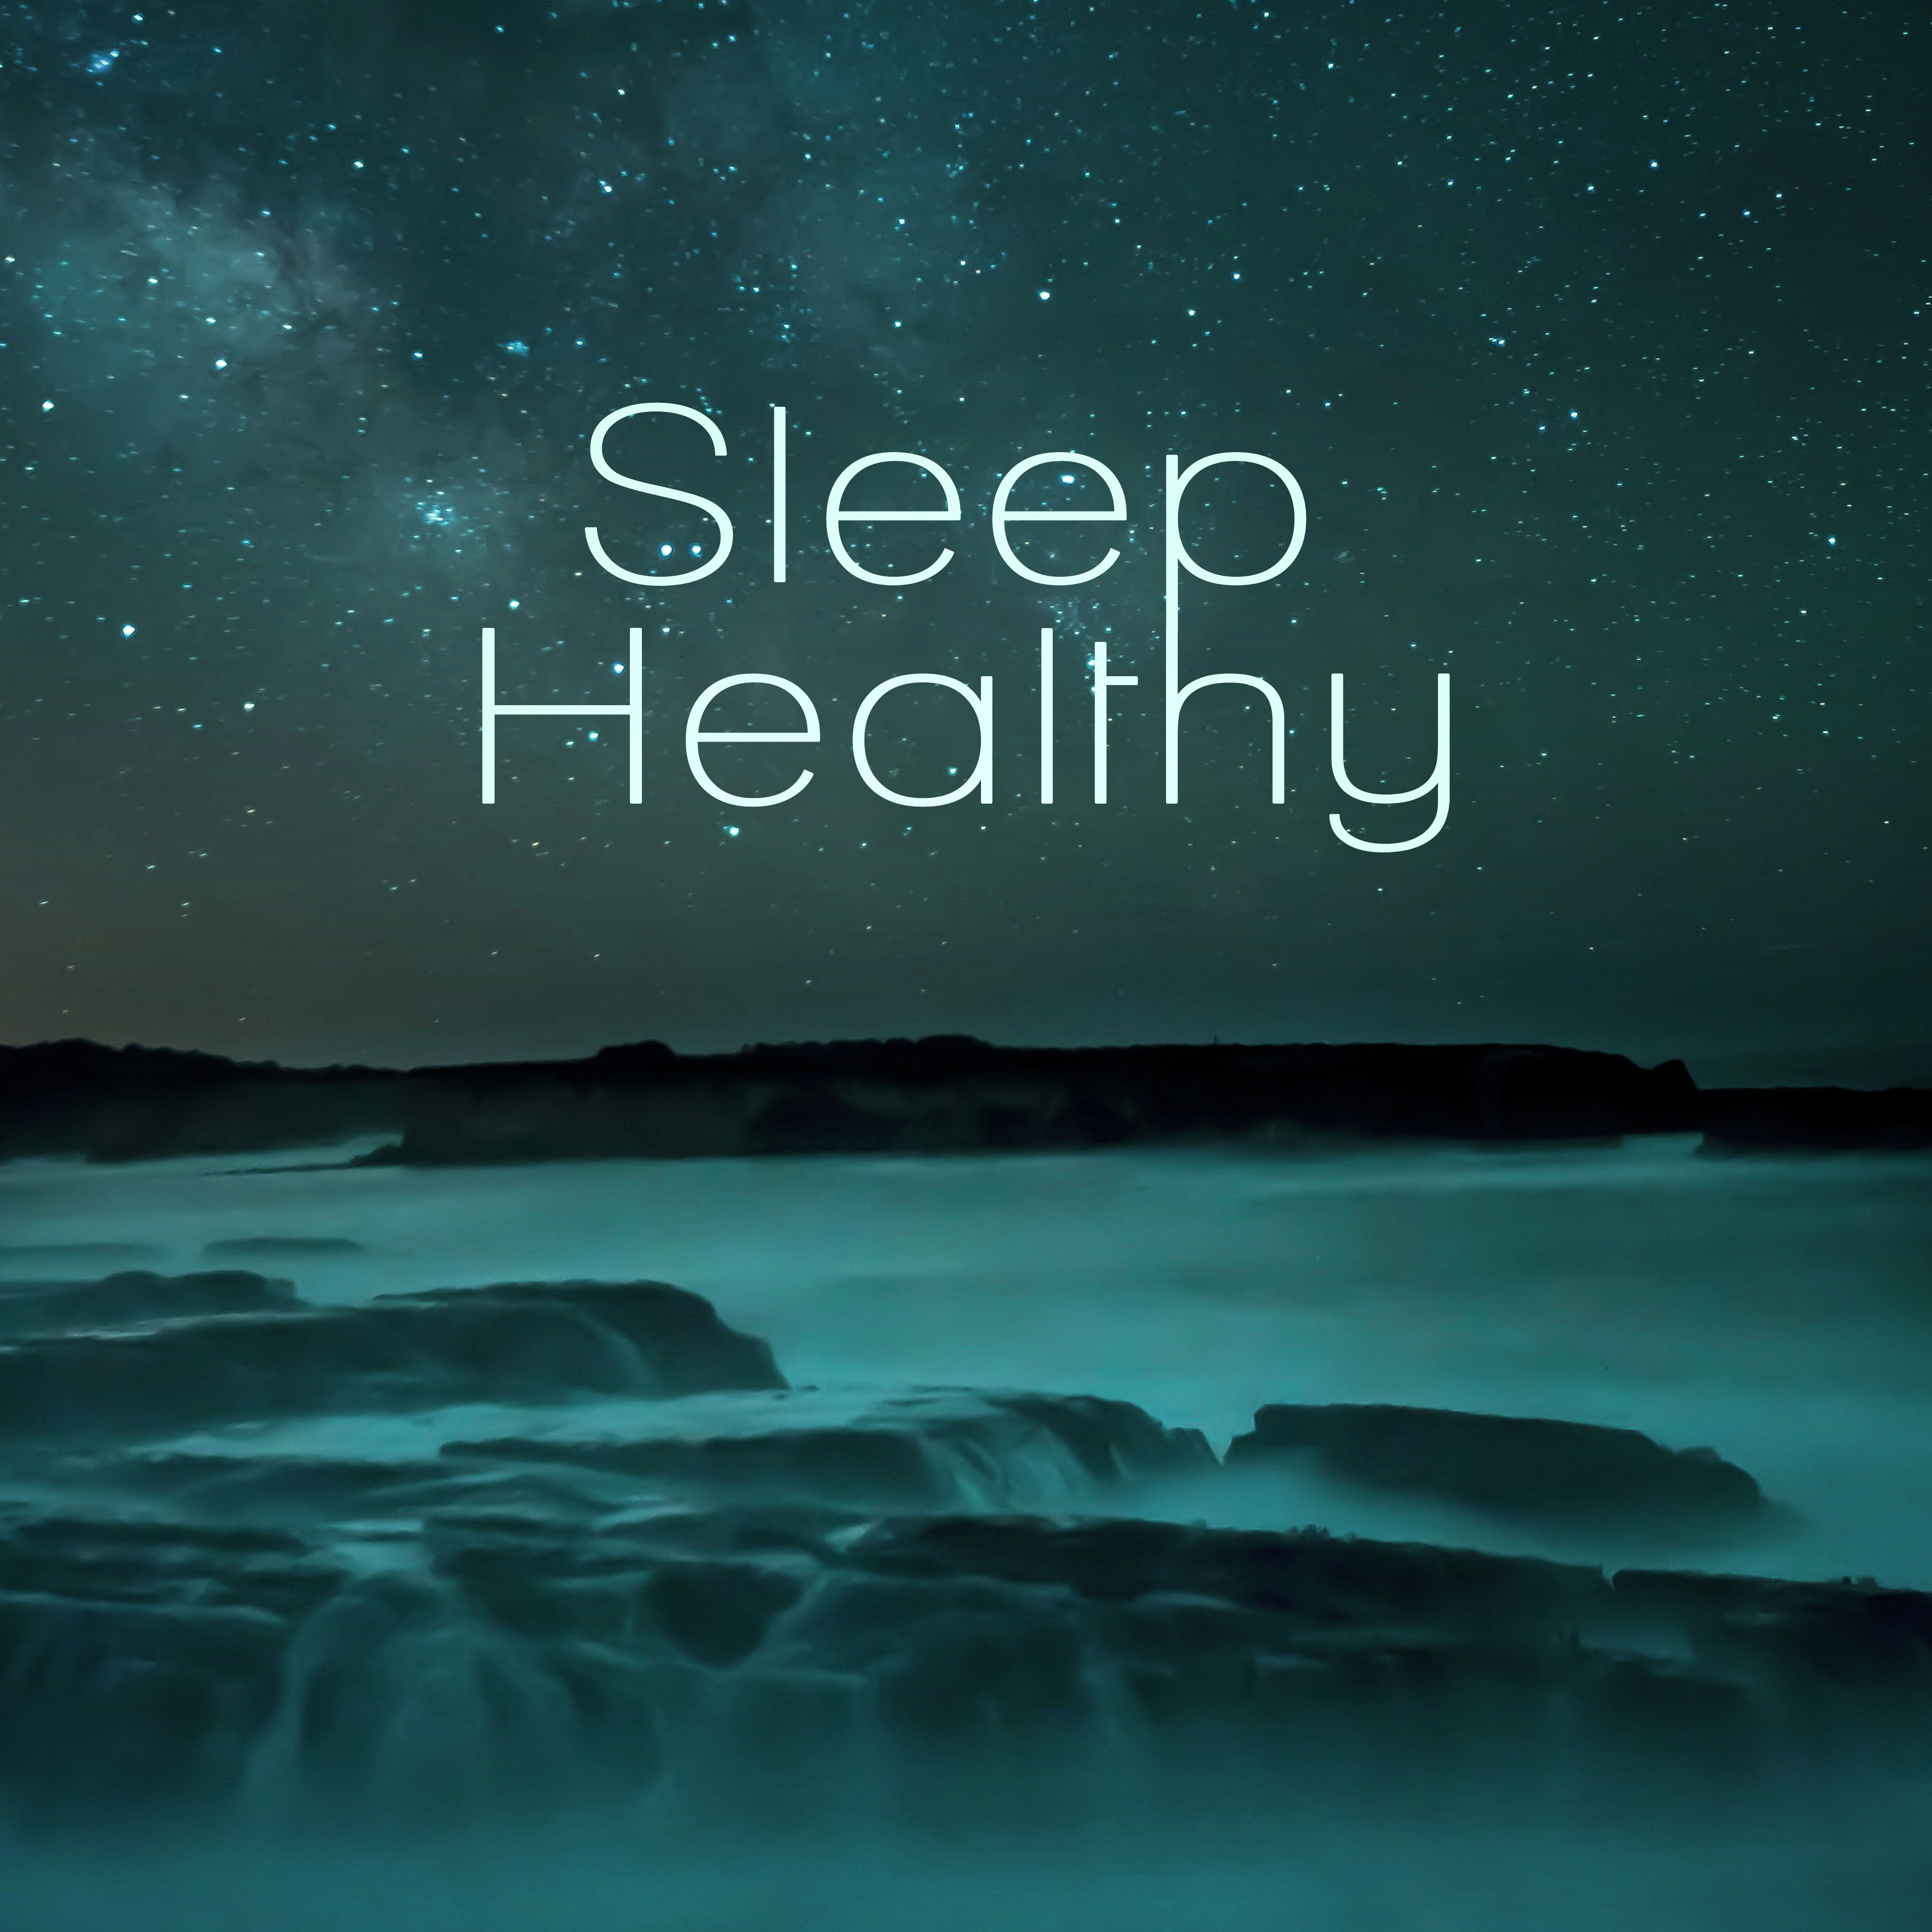 Sleep Healthy  Calm Music For Sleep, Deep Sleeping Therapy, Healing Sounds of Nature, Soft Music for Relax, Fall Asleep Easily, Ocean and Rain Sounds for Ralexation